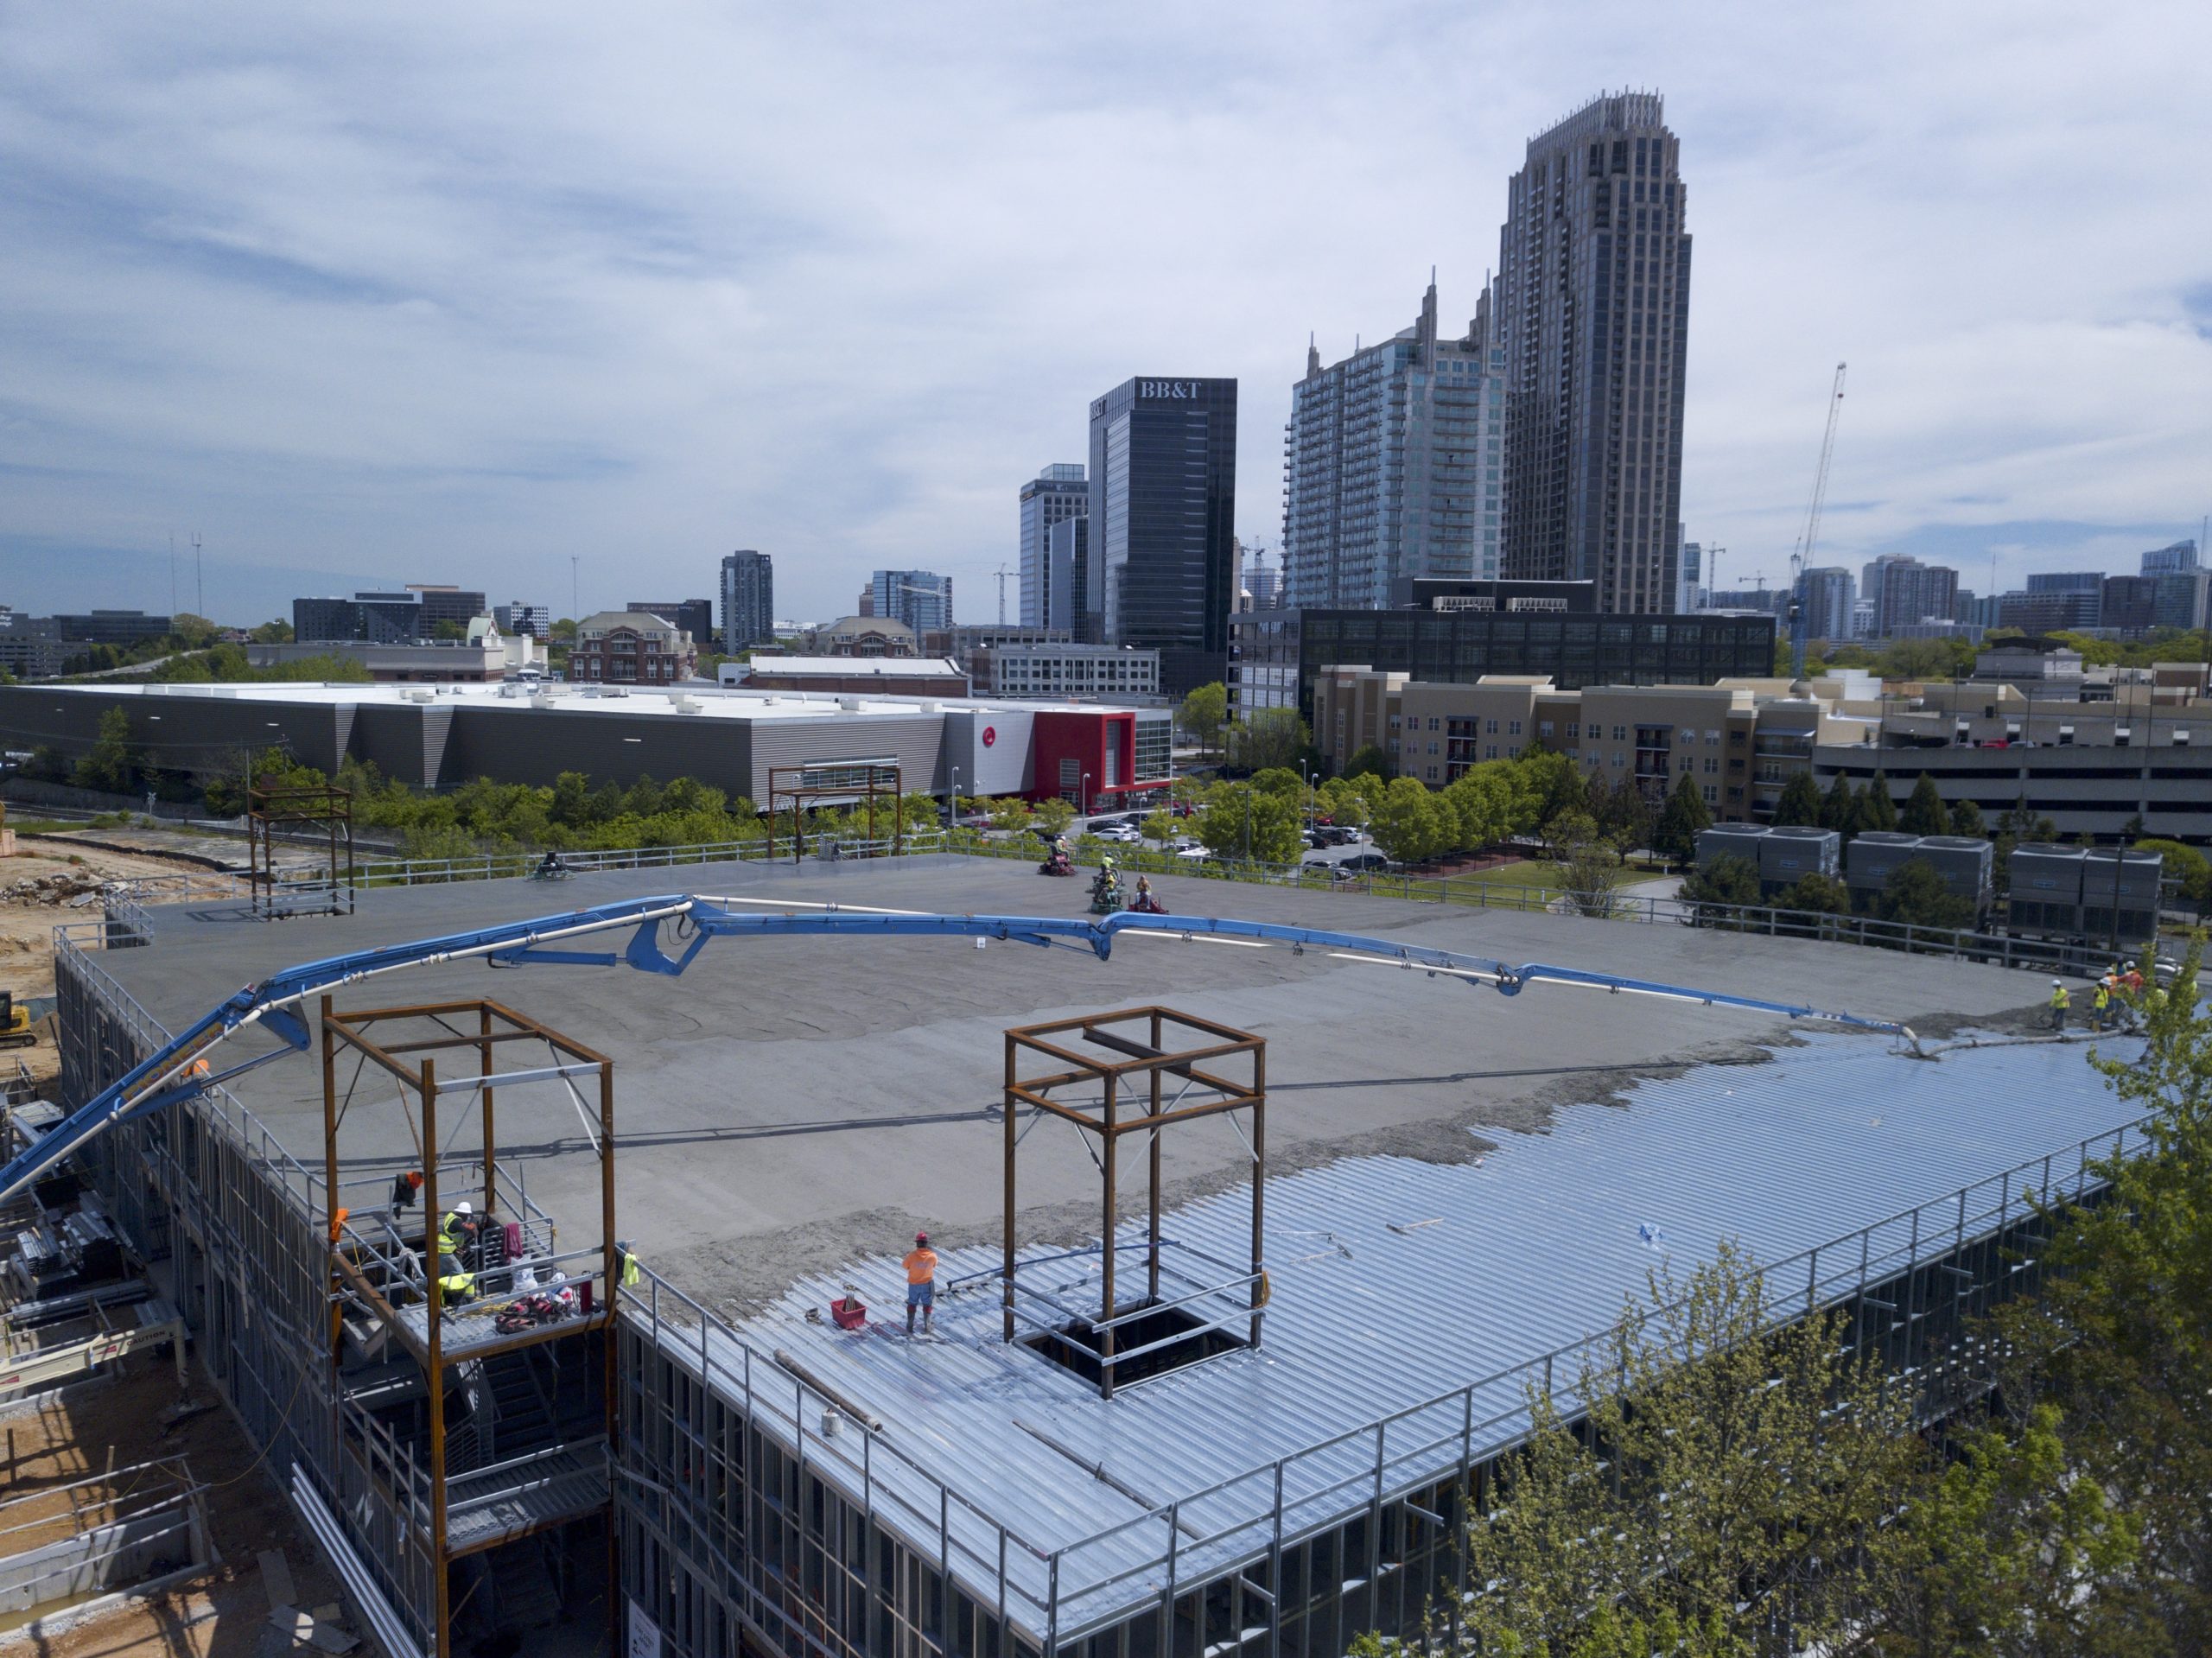 As an authorized installer of MEGASLAB™, Sinclair successfully completed a jointless concrete slab construction project for SAFStor Inc in Atlanta, GA.

